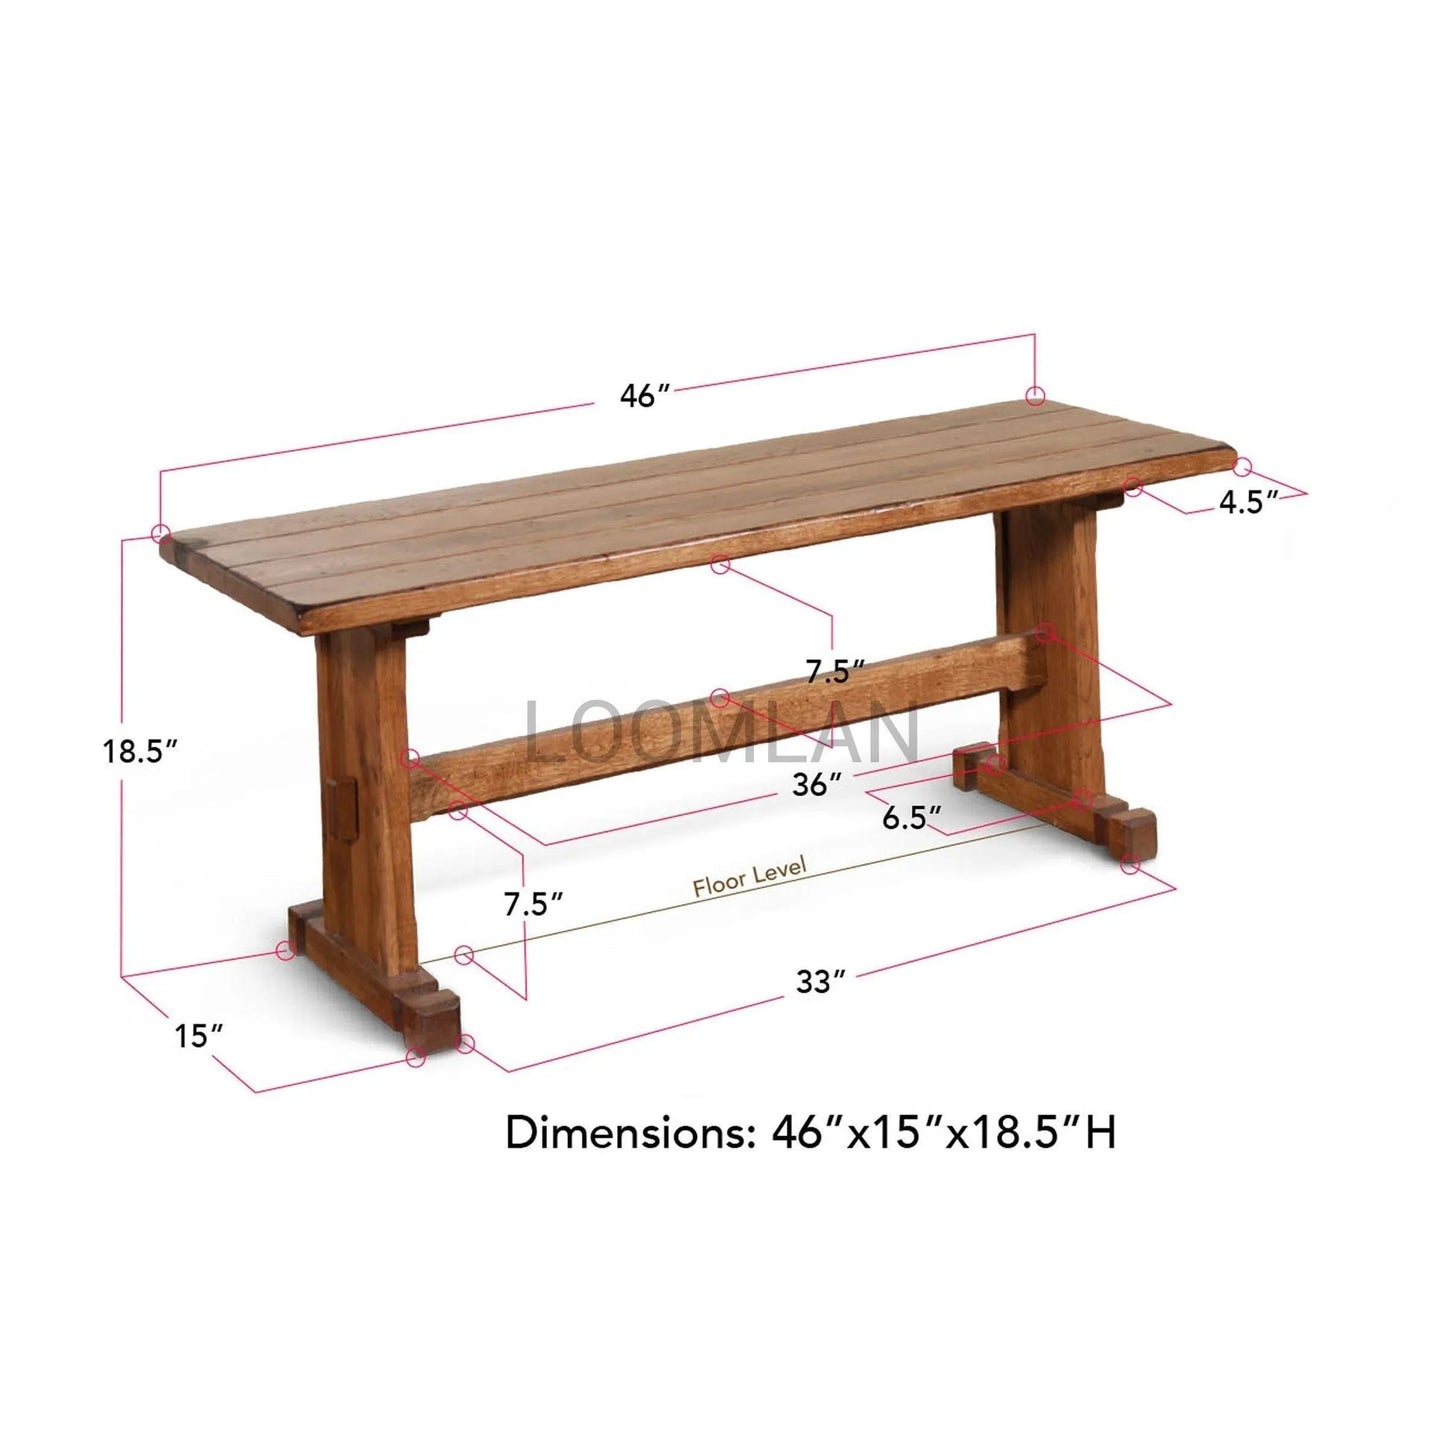 48" Rustic Oak Wood Kitchen and Dining Room Bench (Bench Only) Dining Benches Sideboards and Things By Sunny D